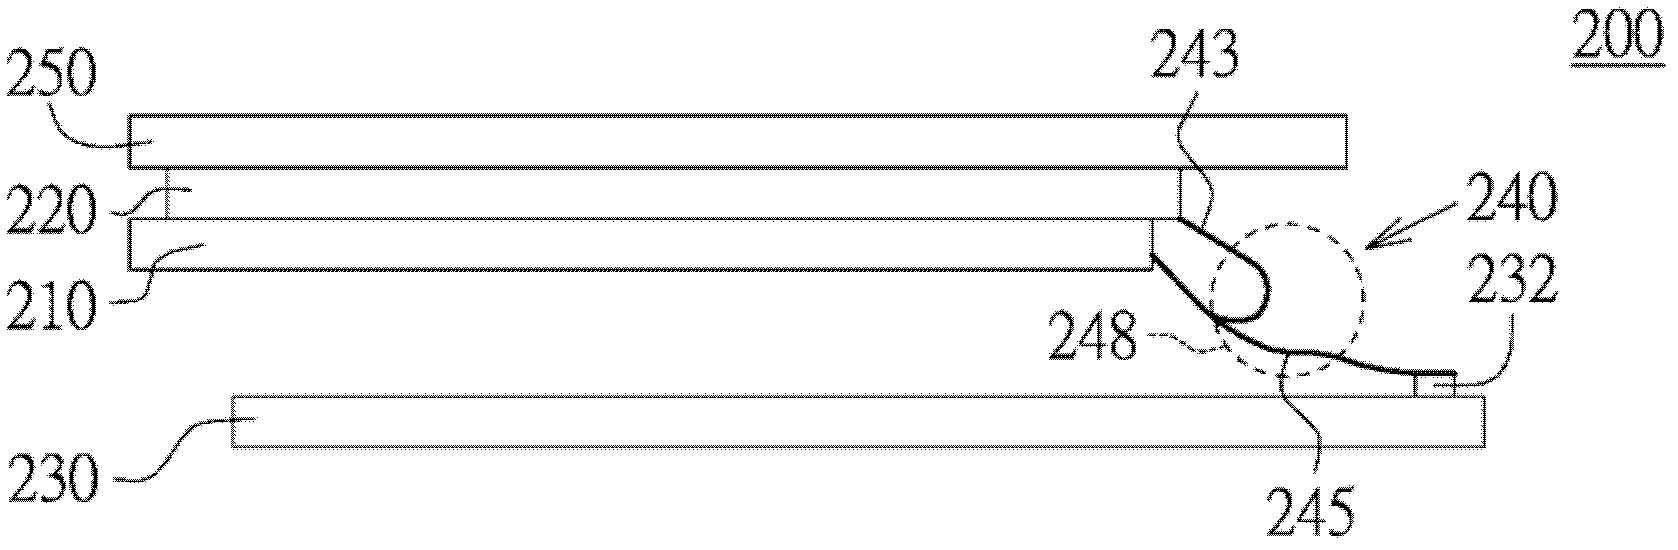 Single FPC board for connecting multiple modules and touch sensitive display module using same